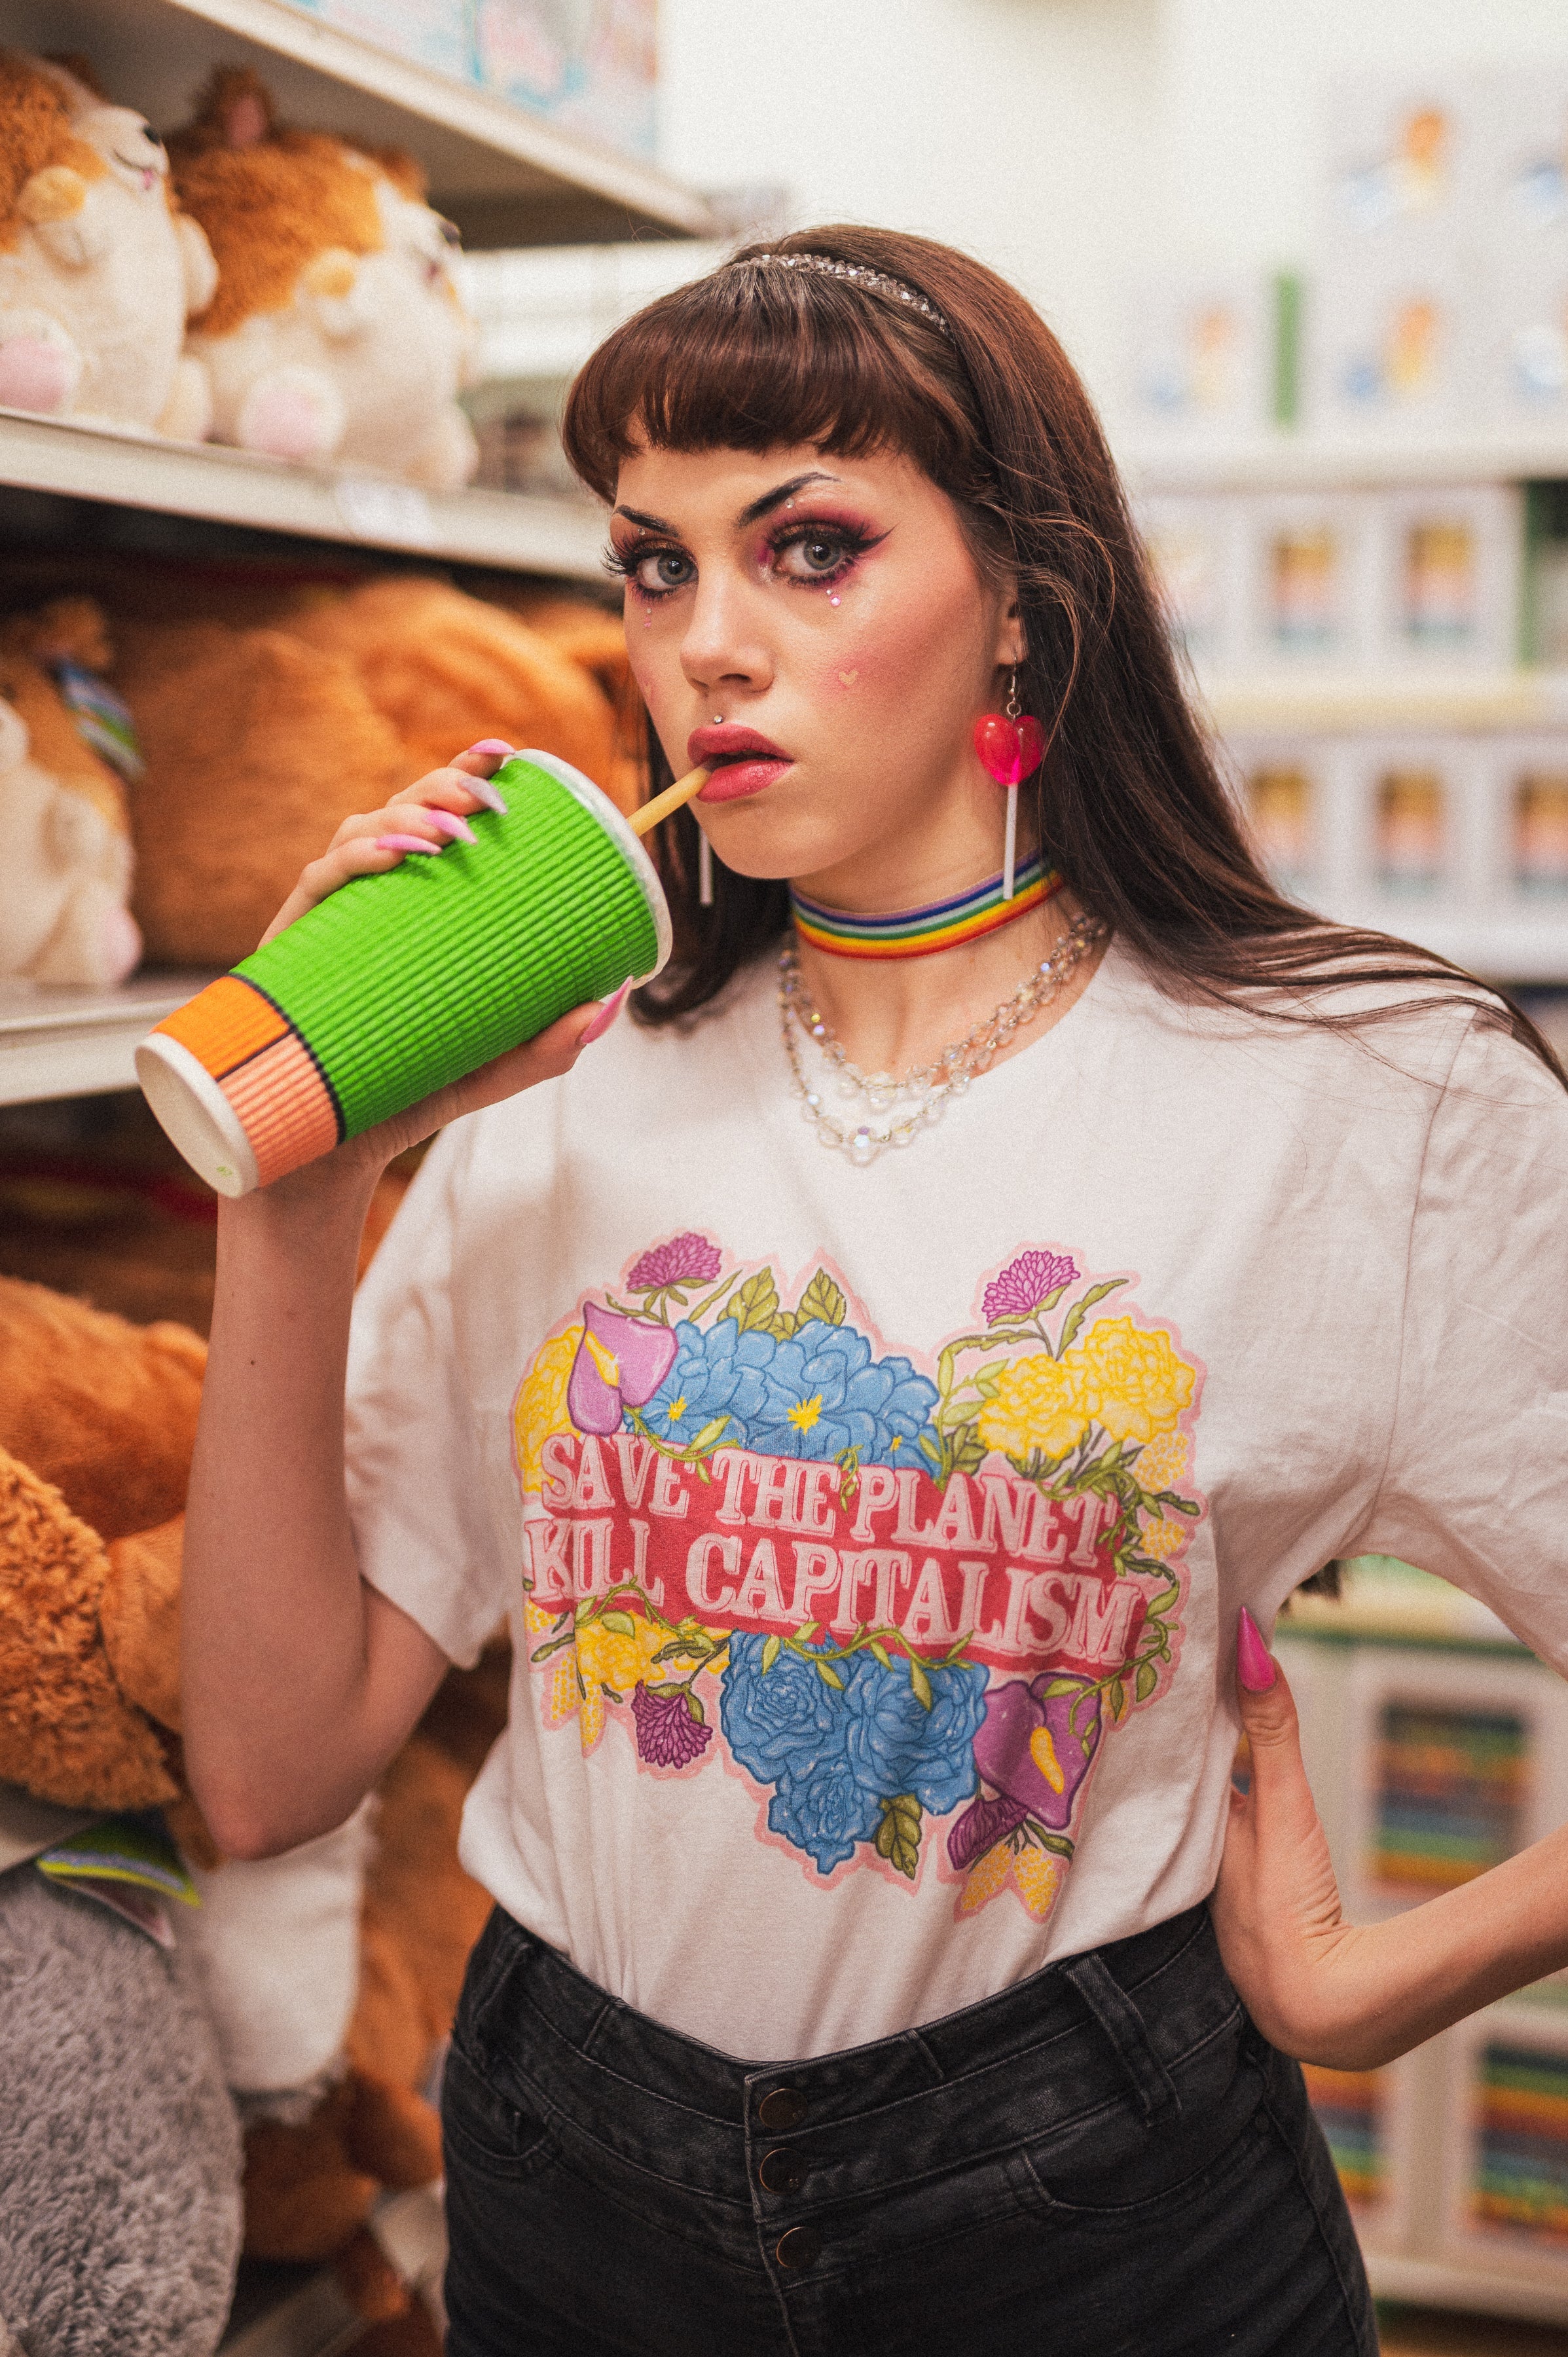 Empowering white feminist shirt featuring statement "Save The Planet Kill Capitalism